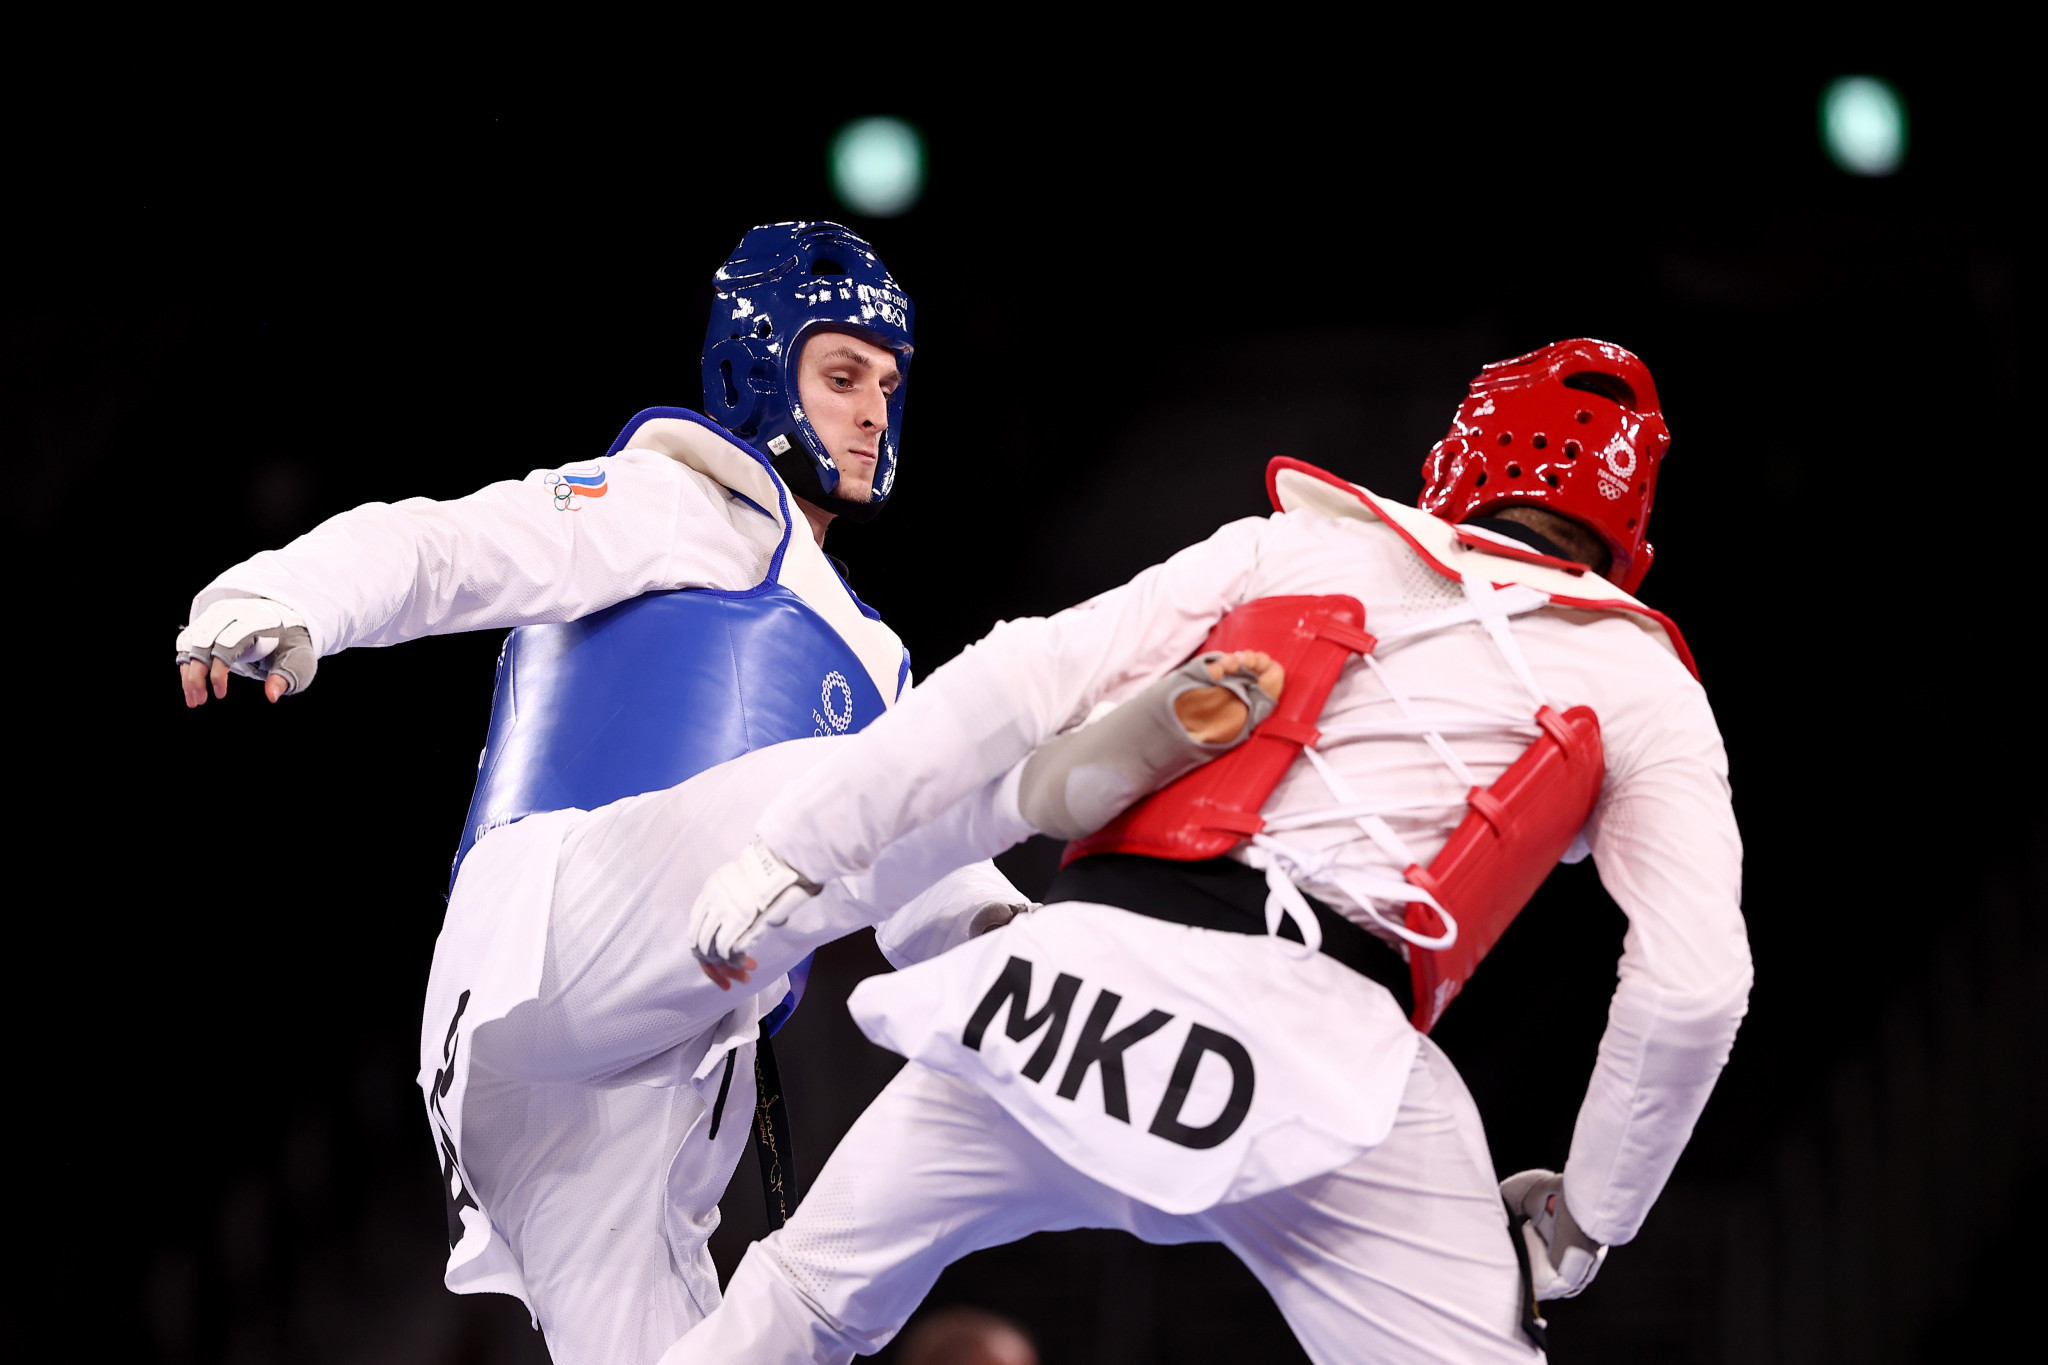 Russian taekwondo players could not compete under their national flag at the Tokyo 2020 Olympics, where Vladislav Larin, left, won a gold medal ©Getty Images